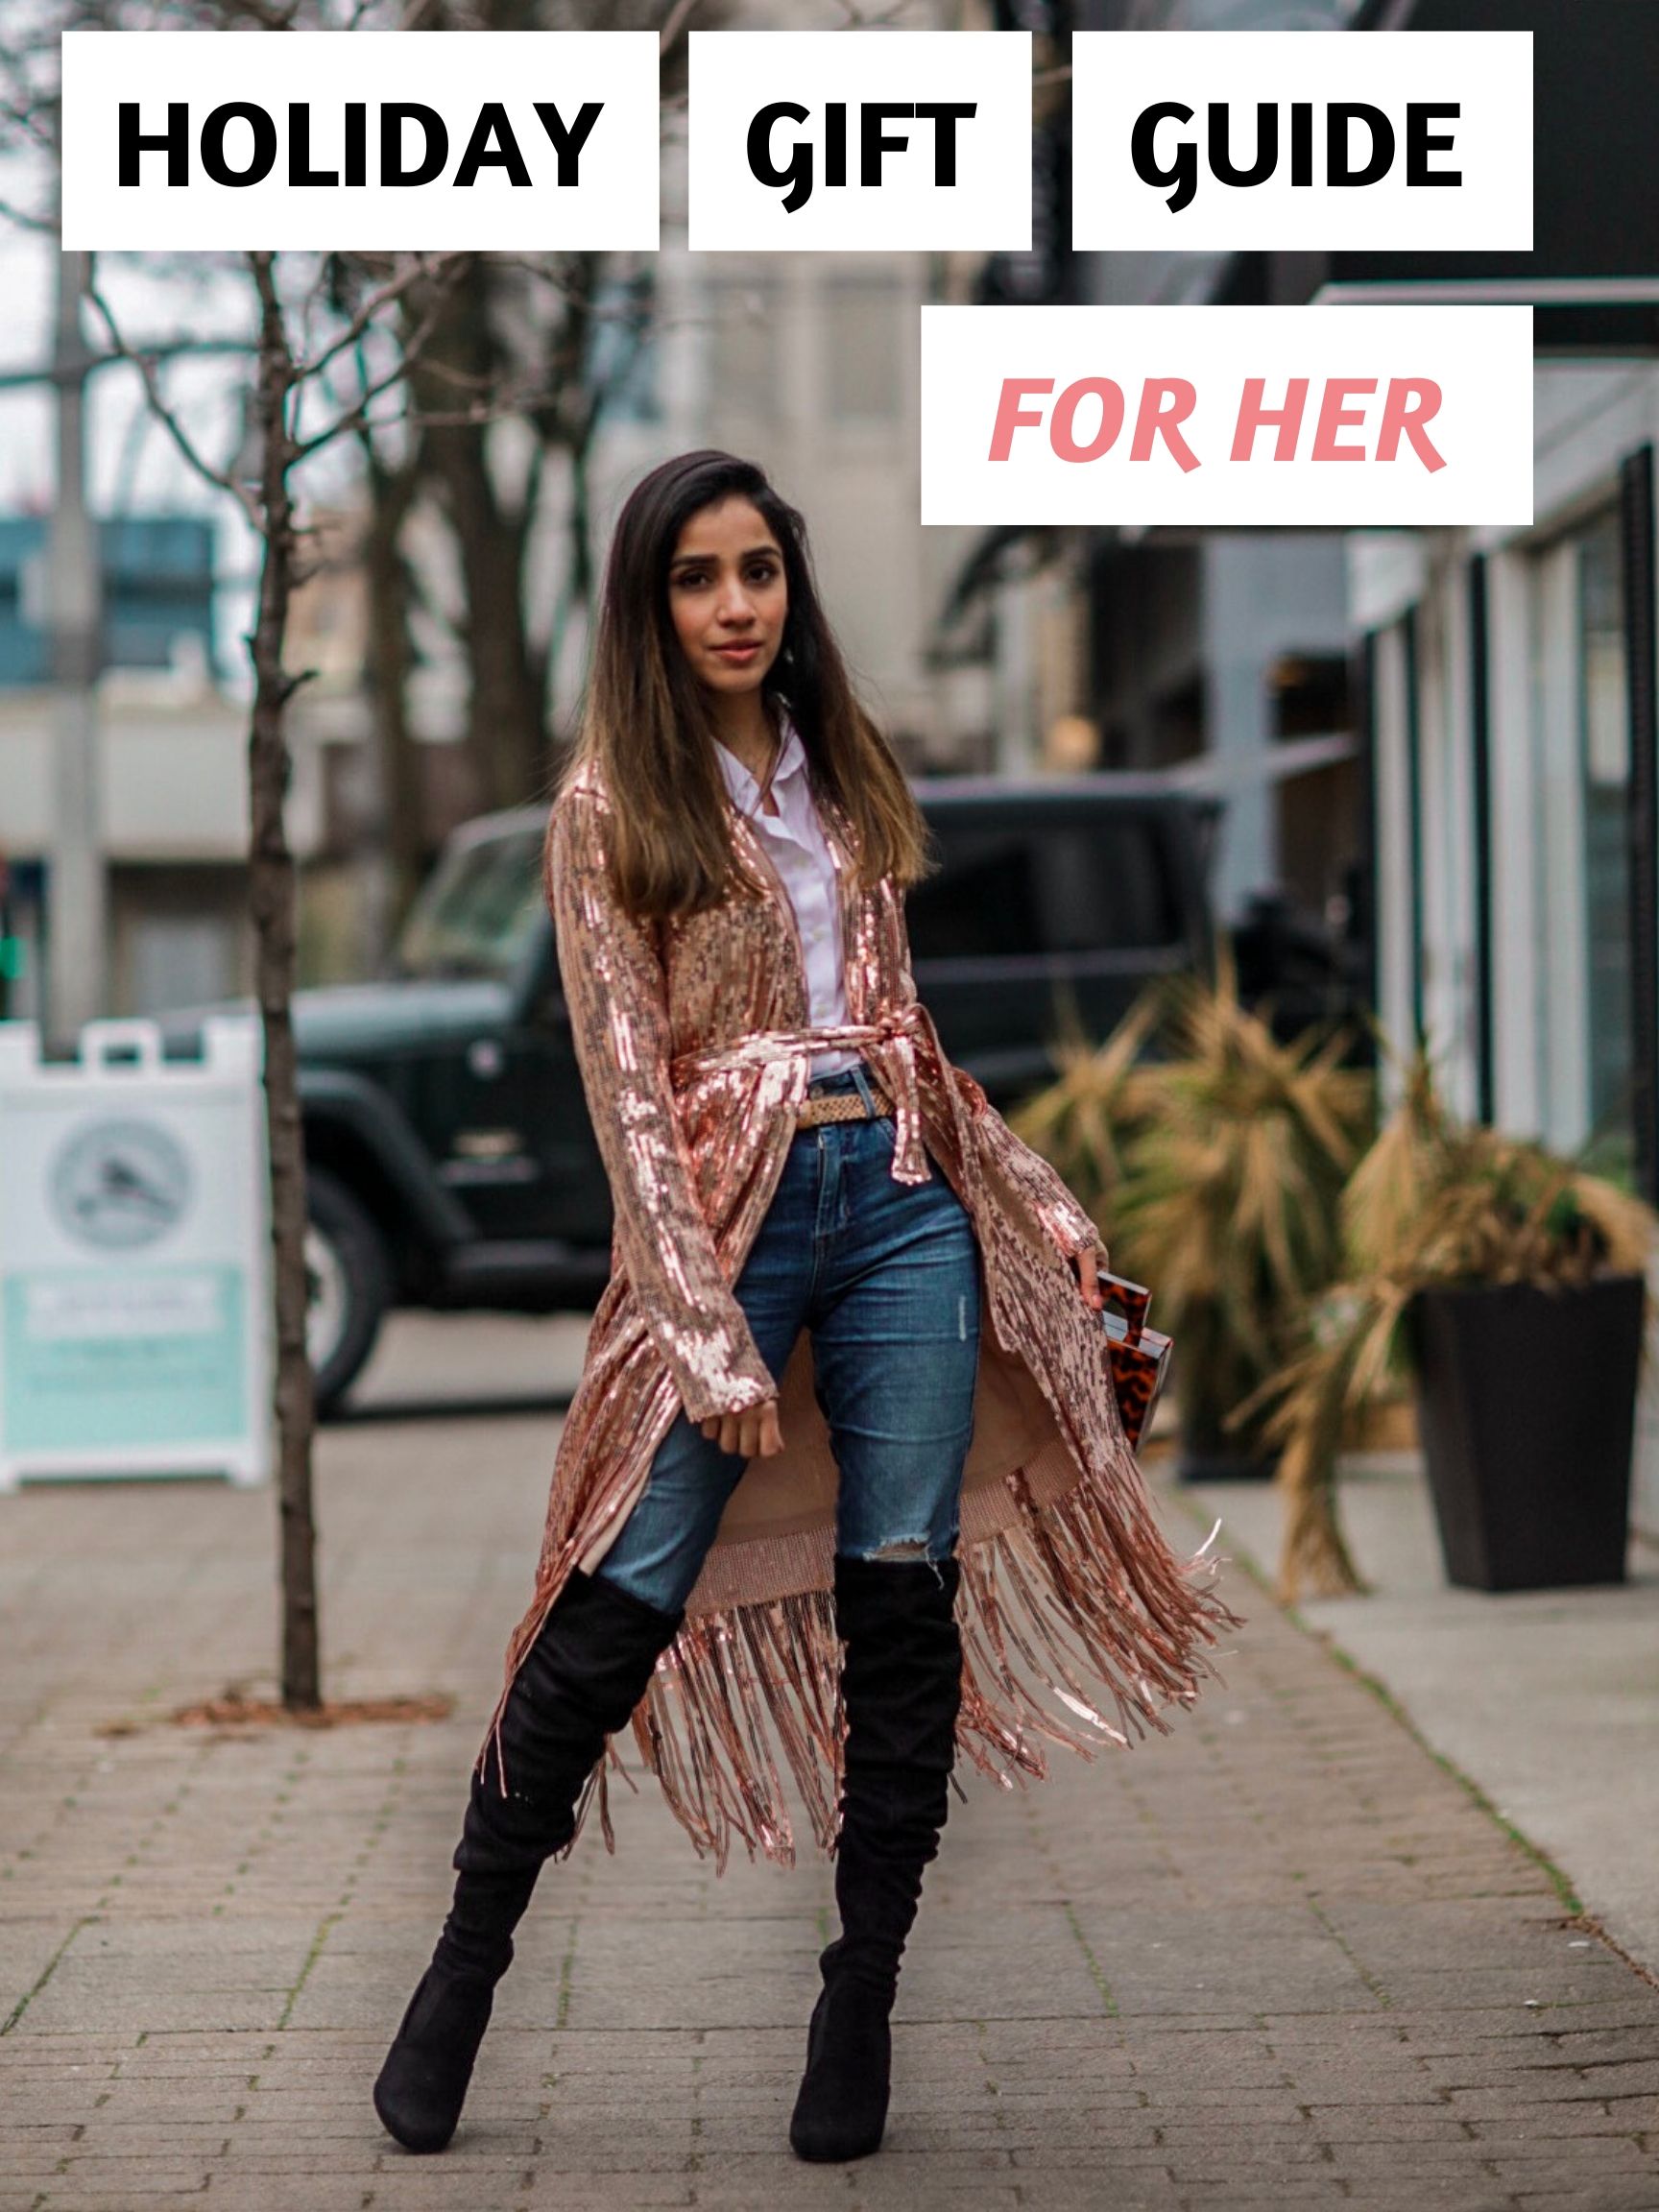 Your Ultimate Holiday Gift Guide For Her 2019 Faiza Inam Gift Ideas for Her Holiday Ideas Season Giving 4